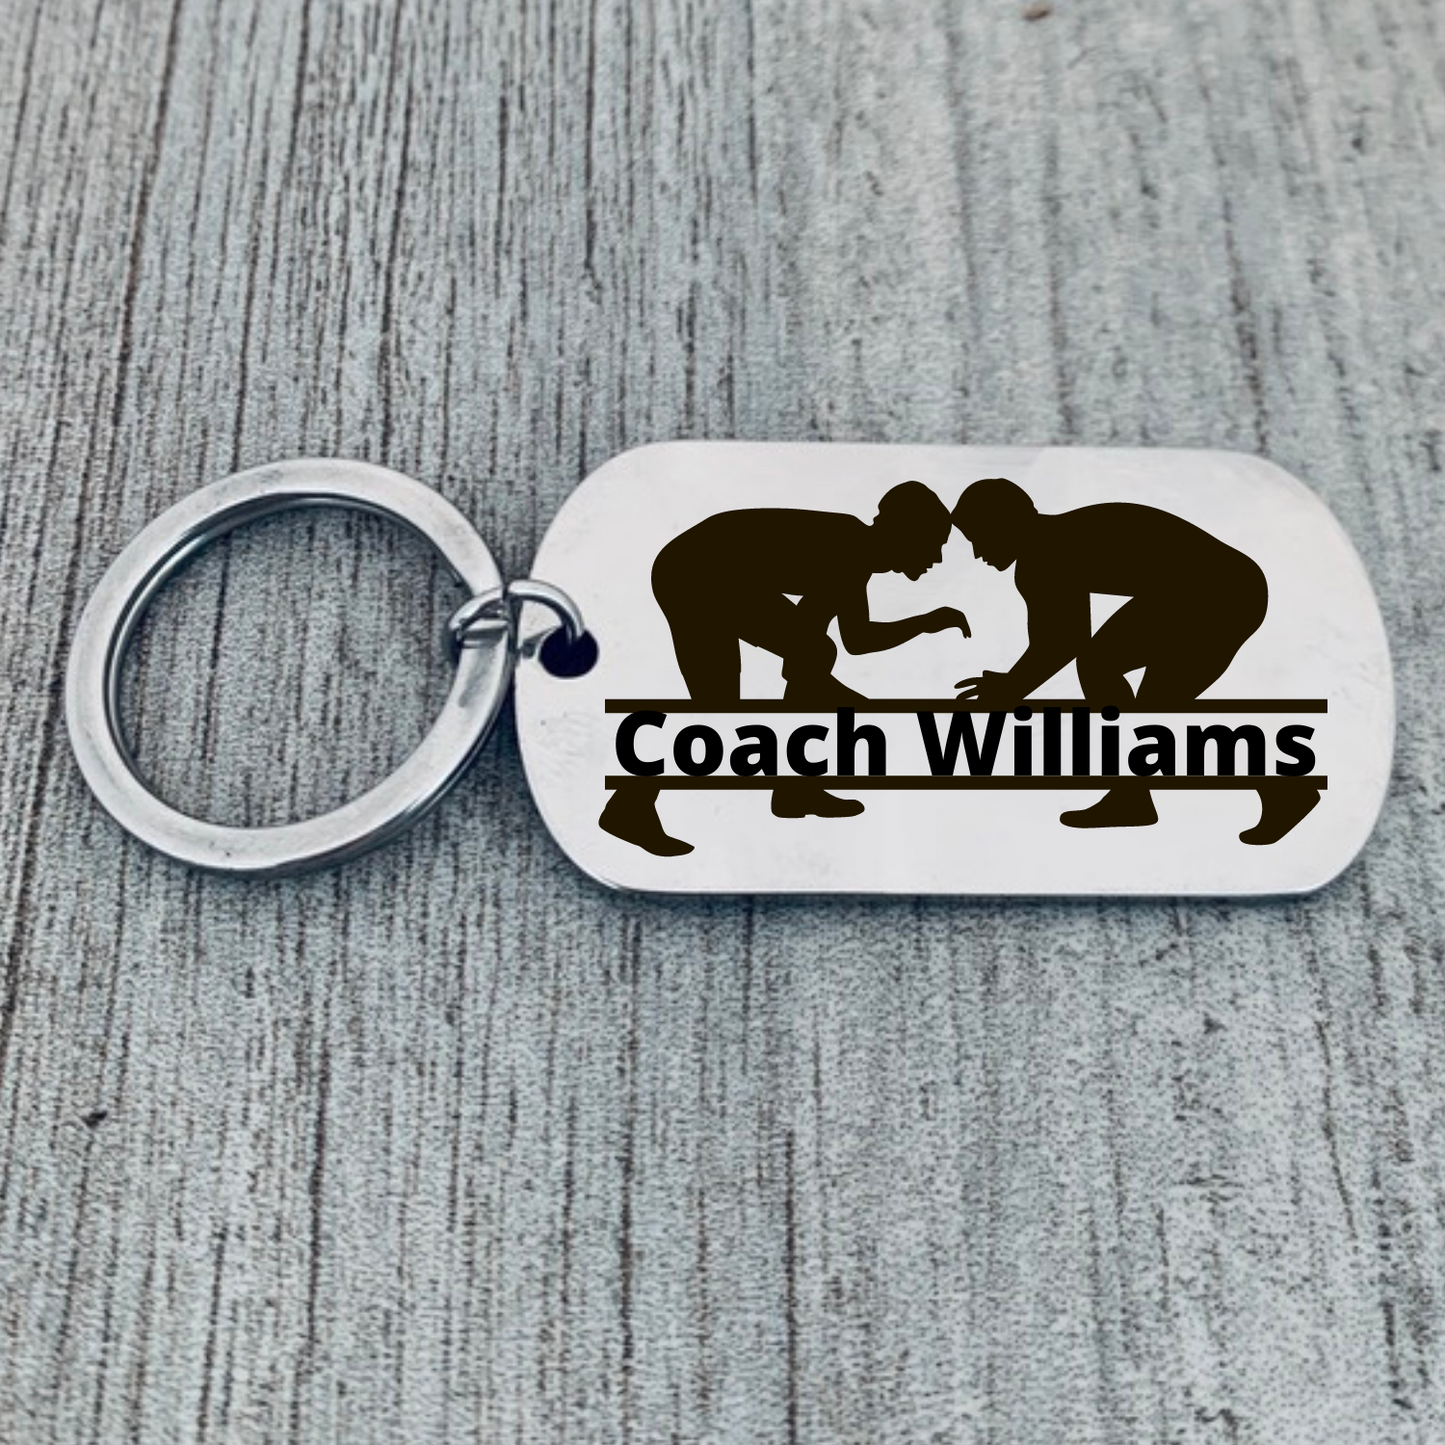 Personalized Engraved Wrestling Coach Keychain - Pick Style